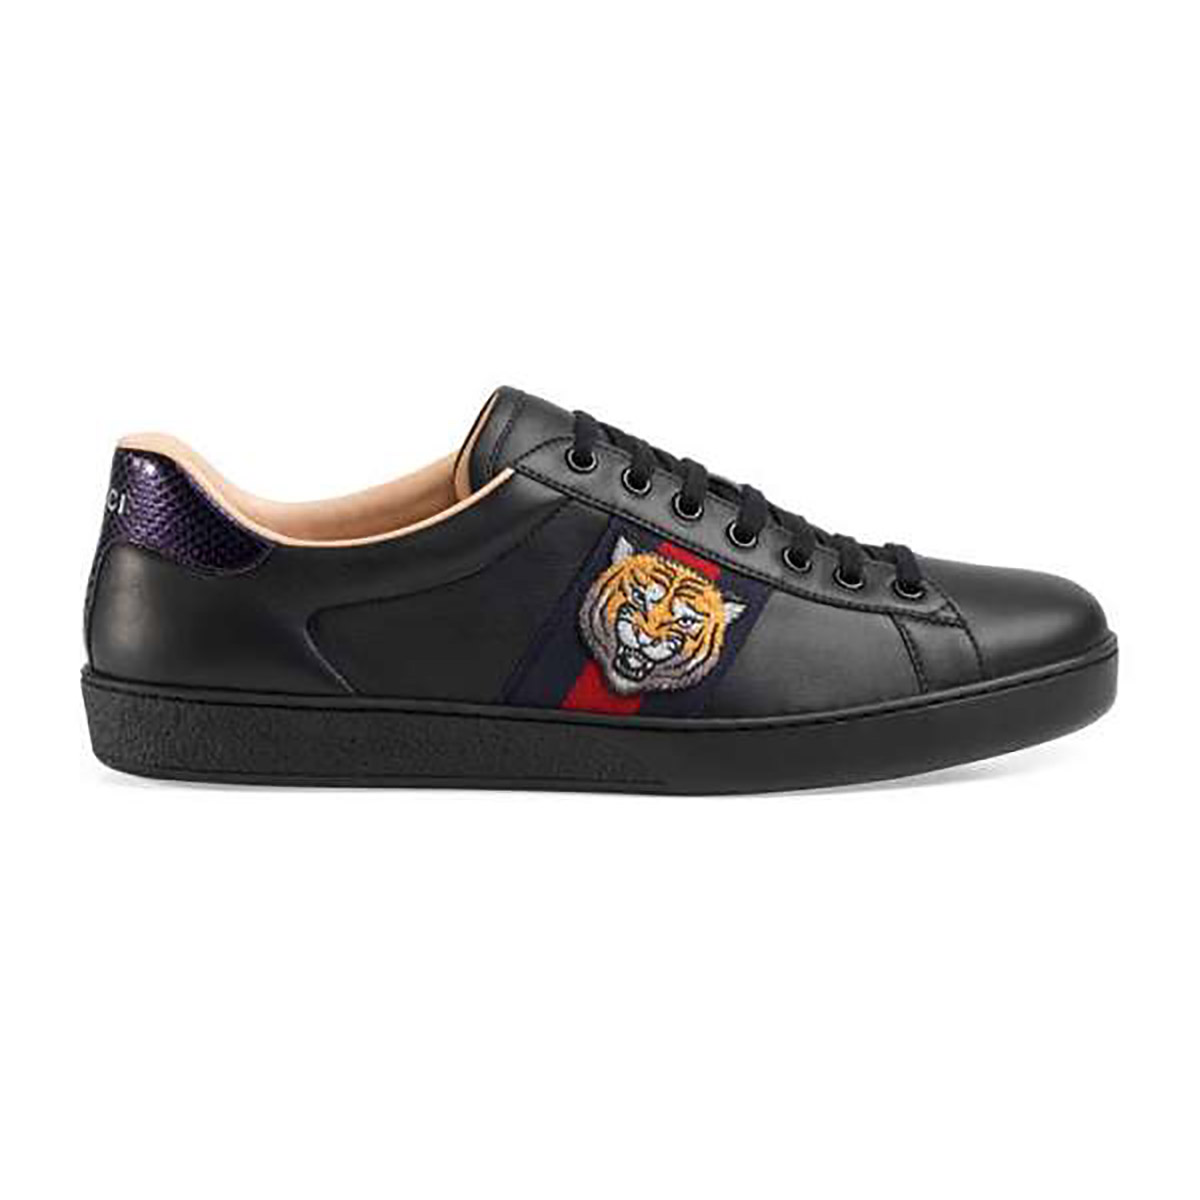 Gucci Men Ace Embroidered Sneaker Shoes with Tiger Web-Black - LULUX